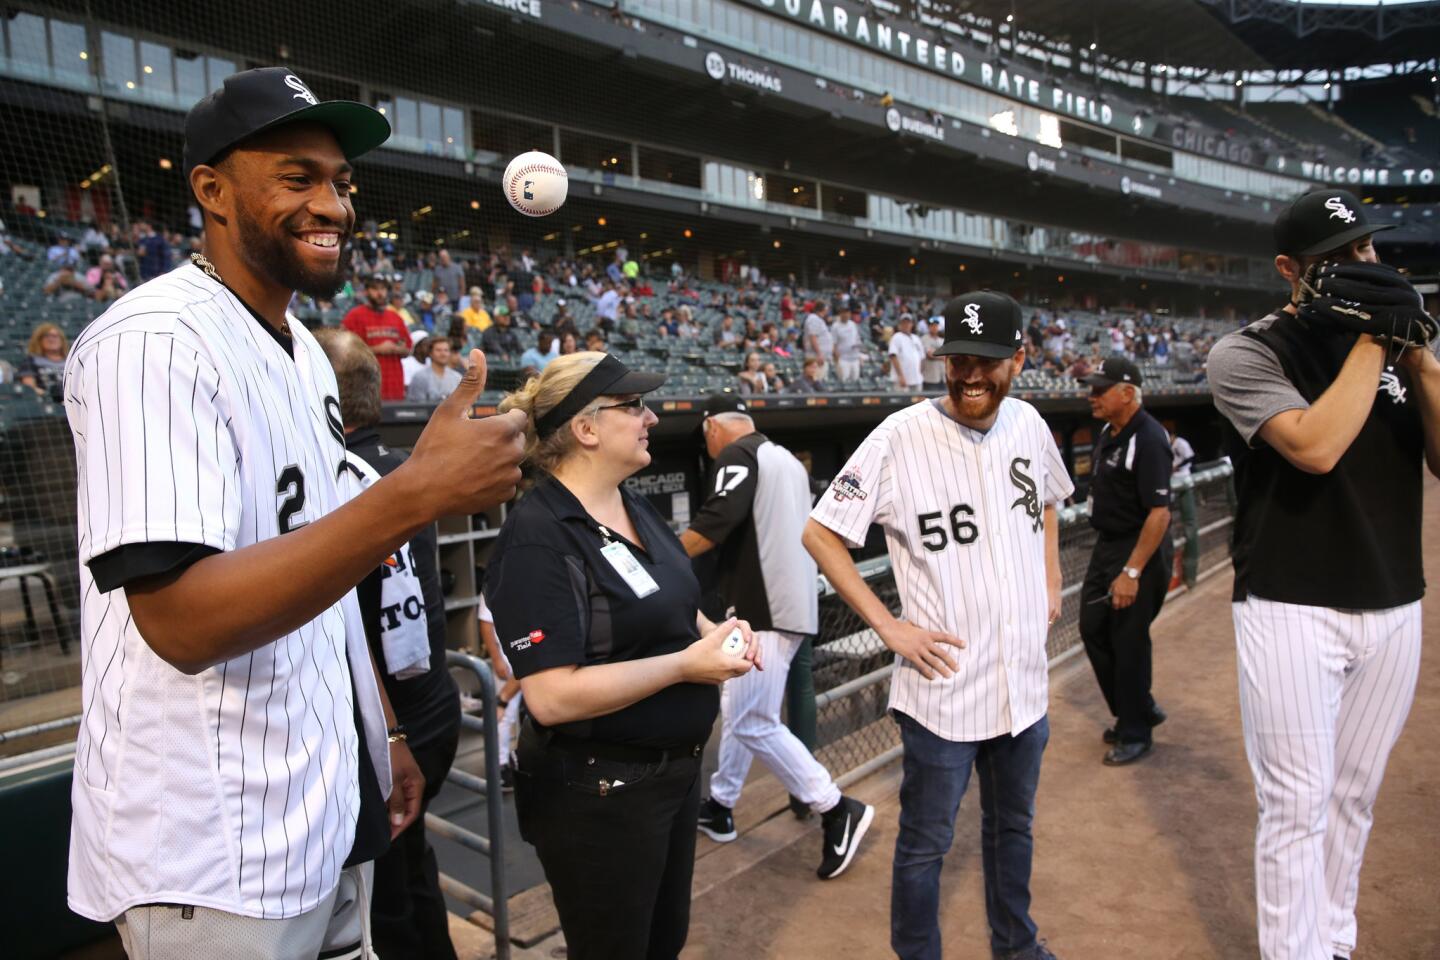 Home Team Advantage with Jabari Parker, by Chicago White Sox